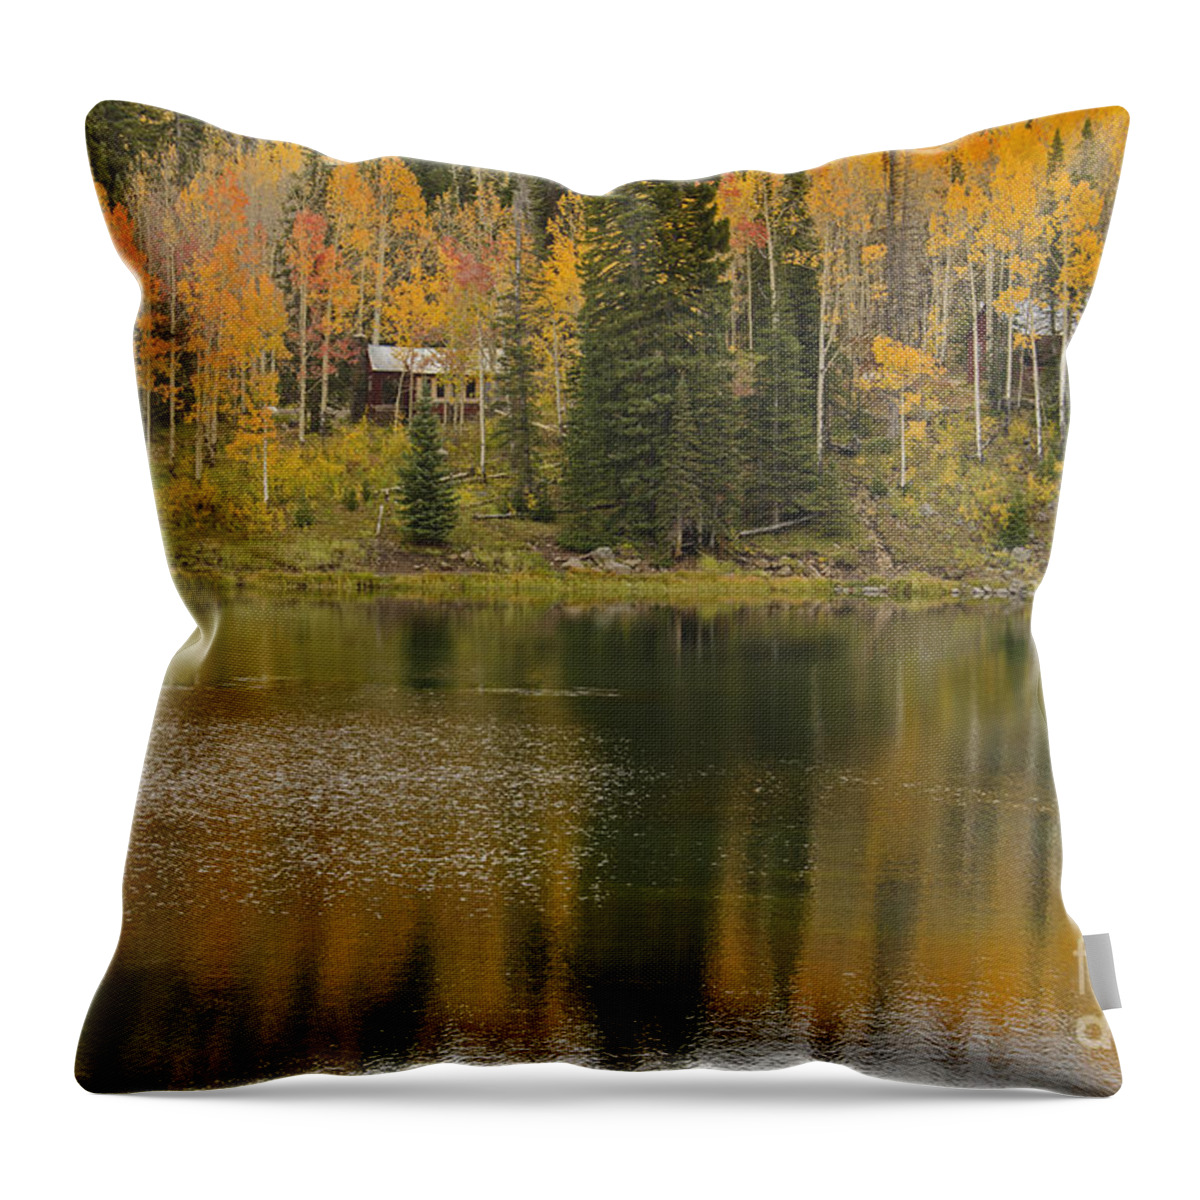 Grand Mesa Throw Pillow featuring the photograph Grand Mesa Resort by Kelly Black